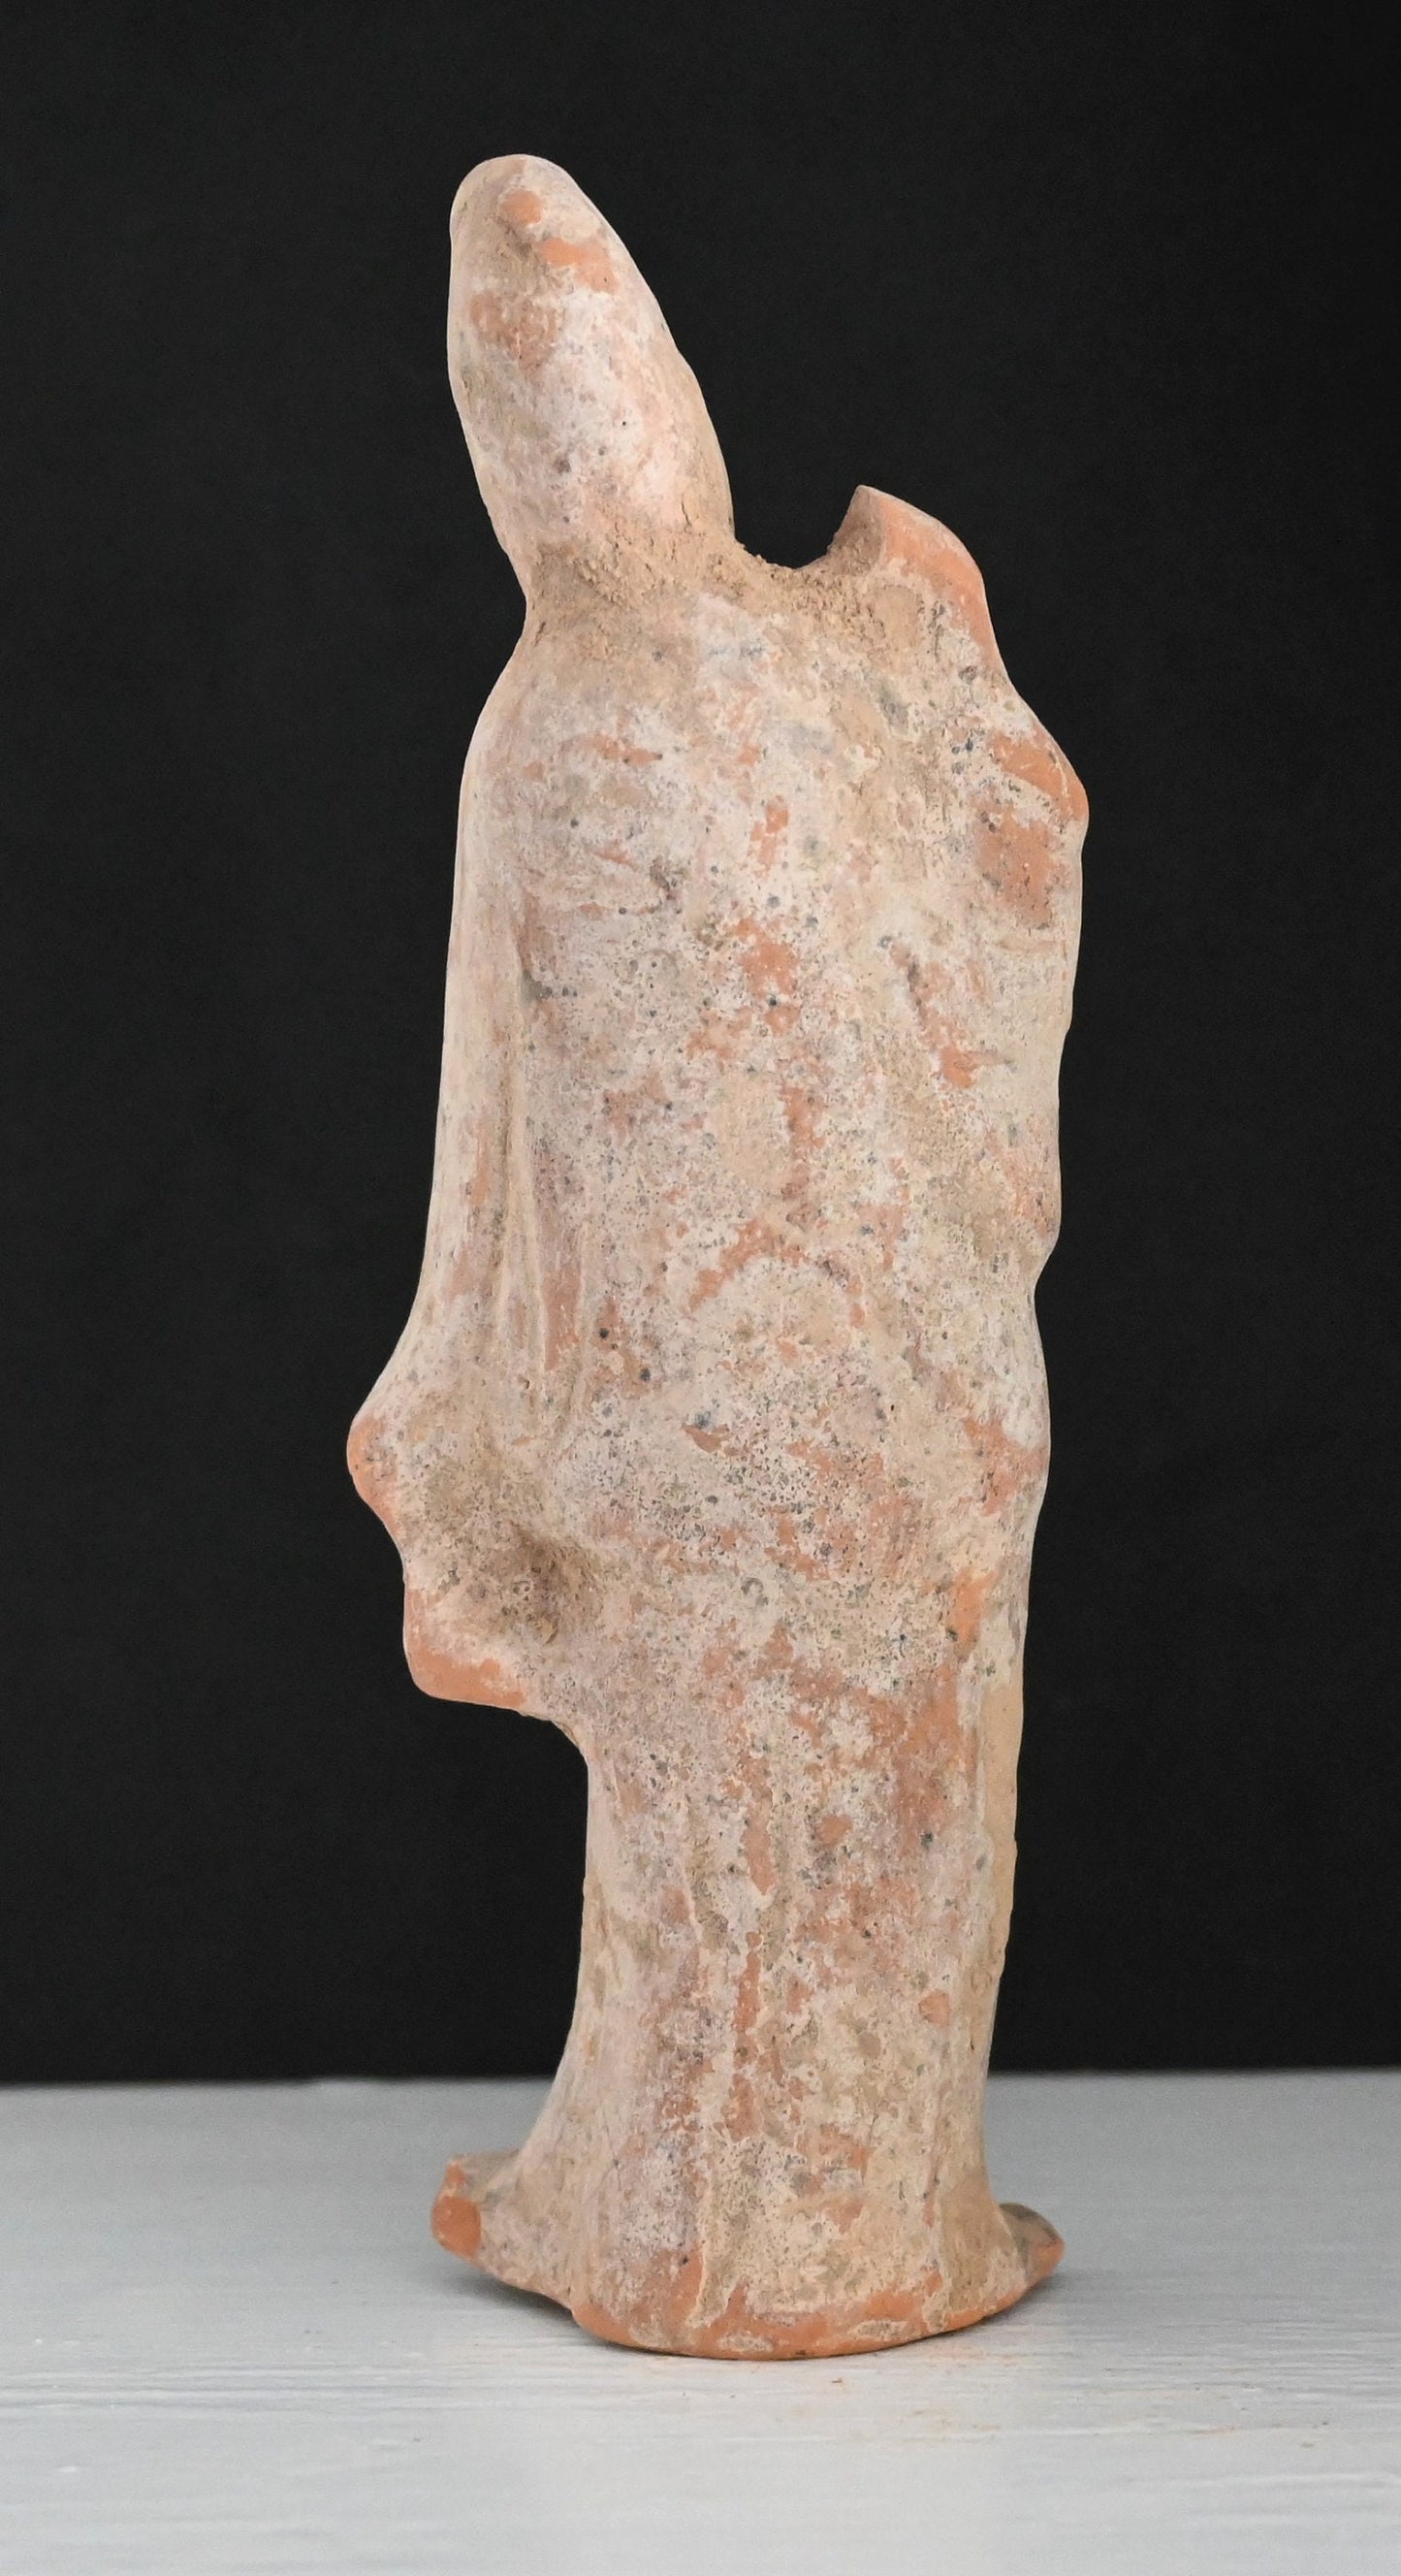 Authentic Han Dynasty, ca. 206 BCE to 220 CE Elegant mold-formed terracotta tomb attendant 7 inches with COA and provenance